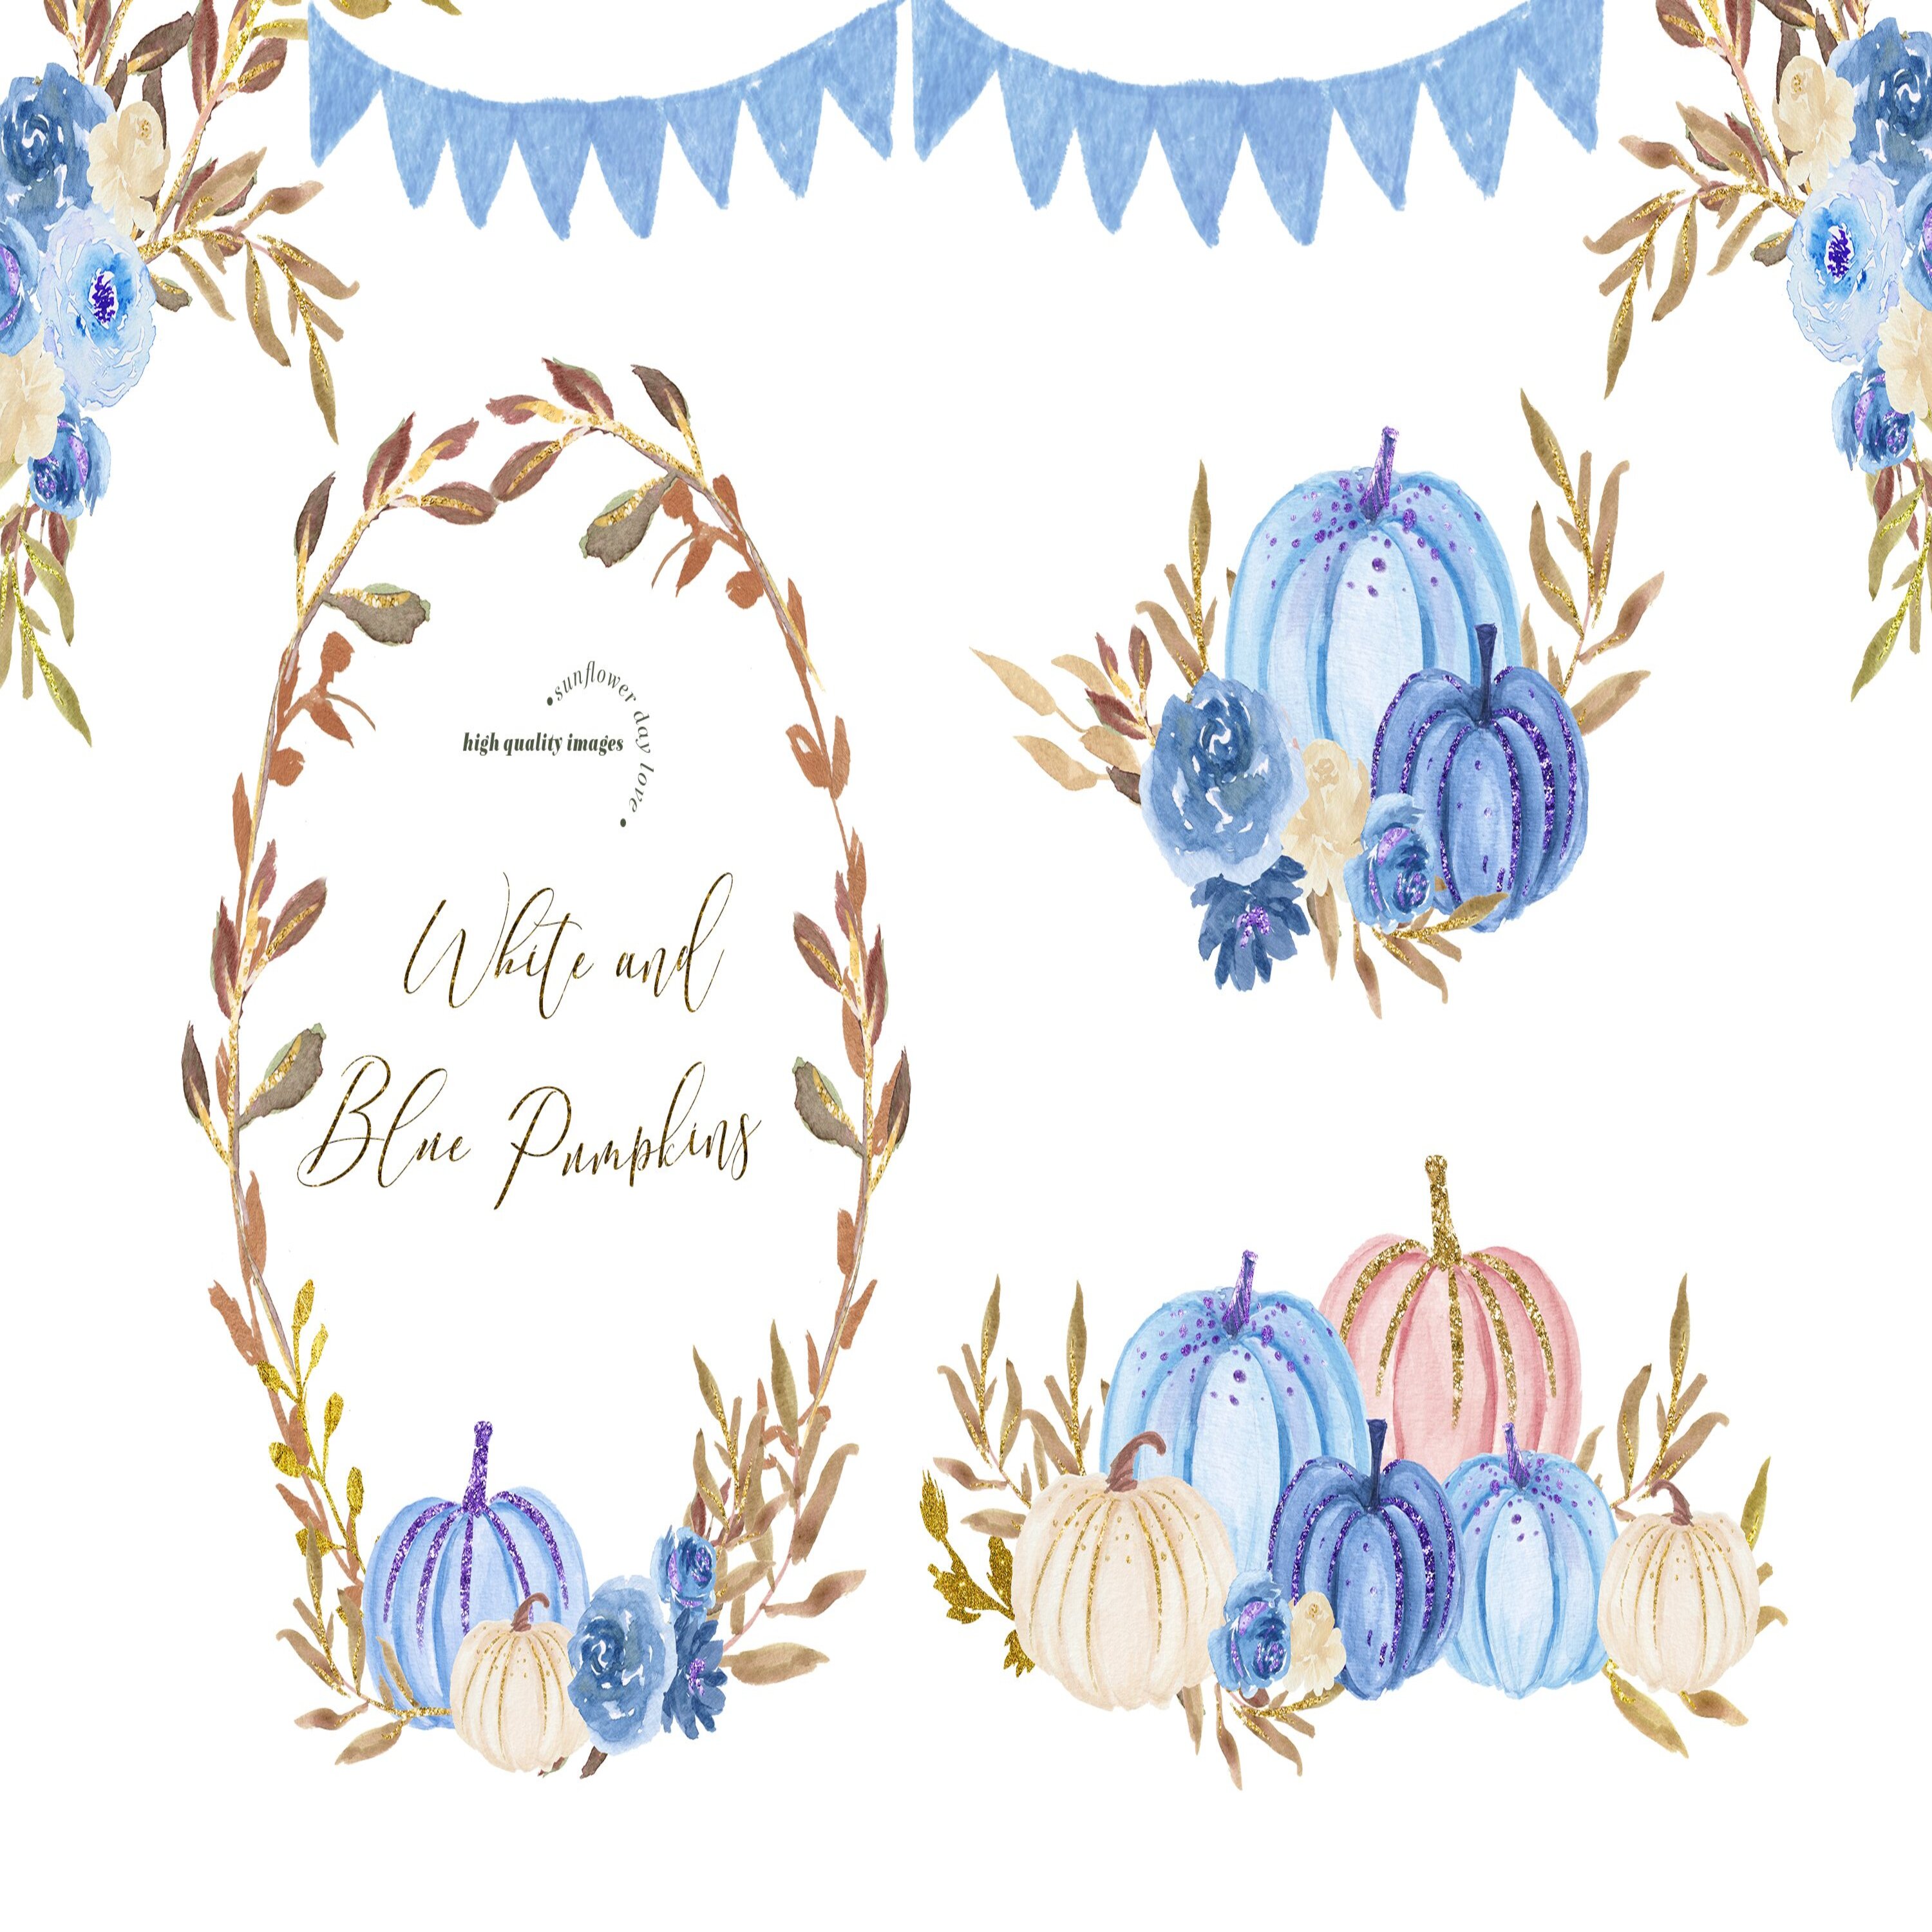 White and Blue Pumpkins Clipart.